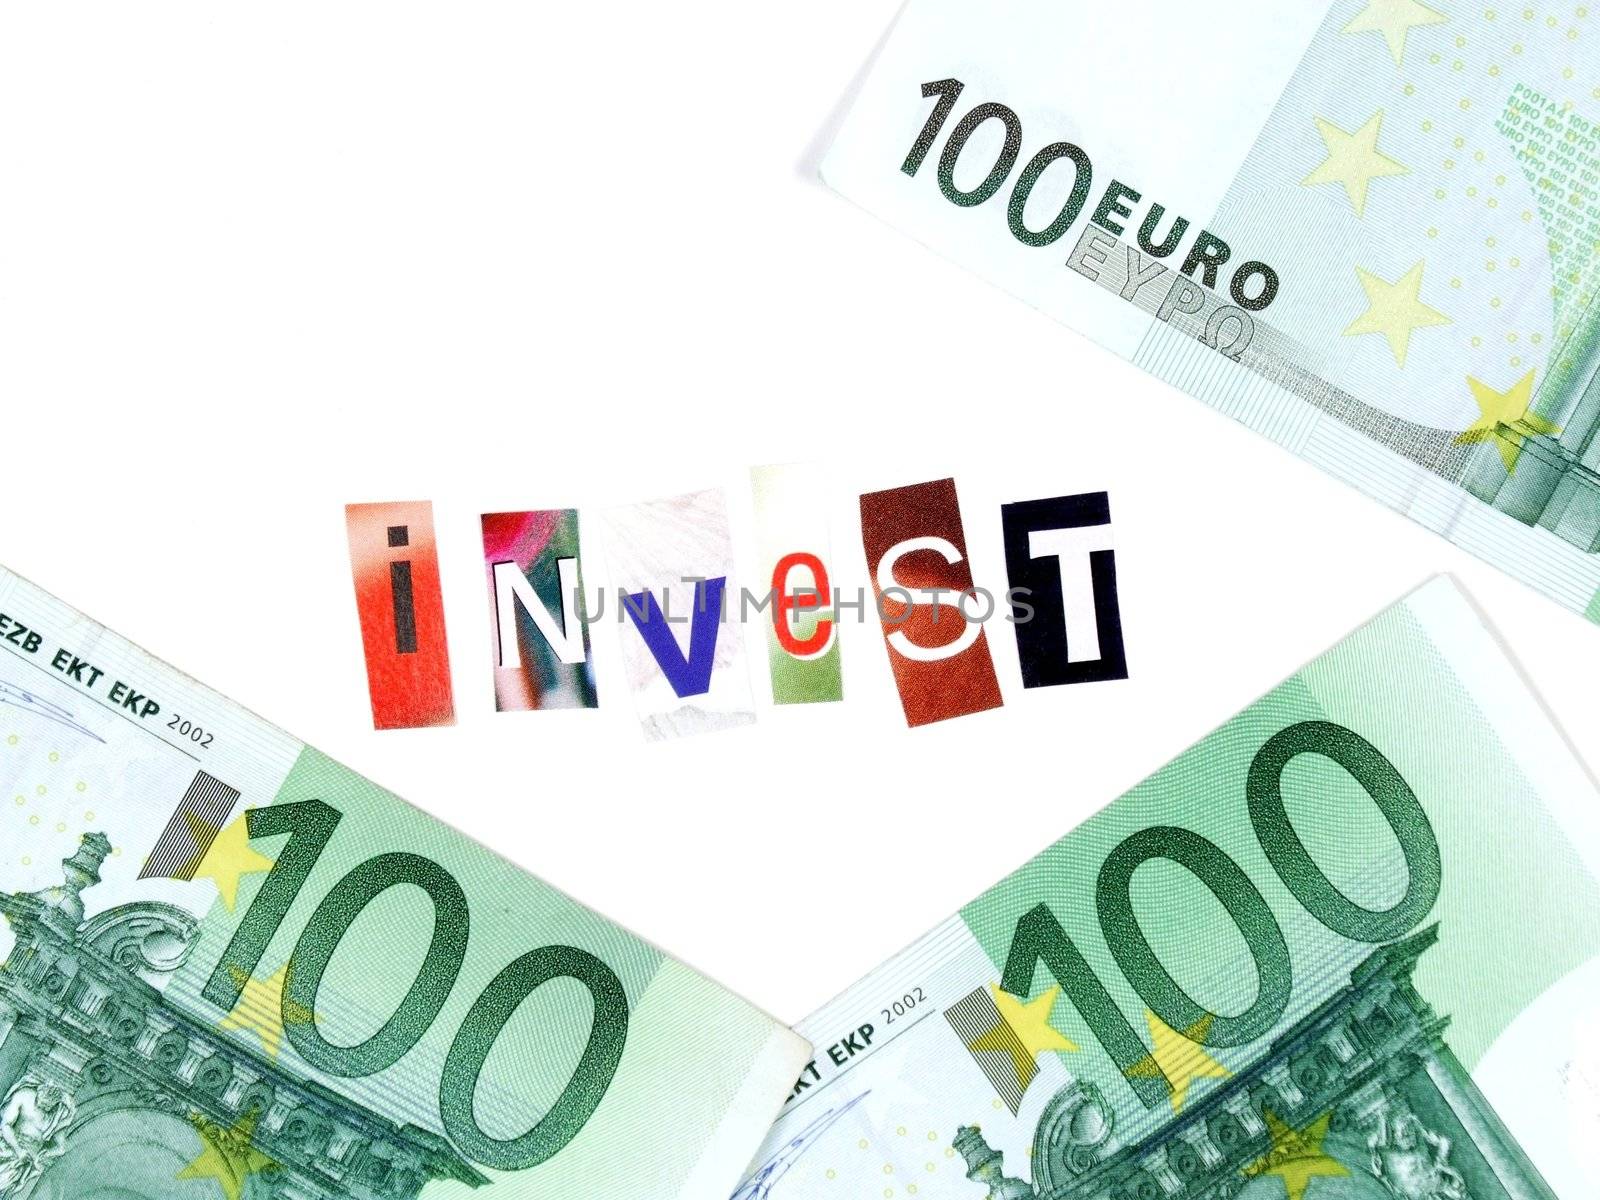 Euro banknotes and word INVEST by tupungato